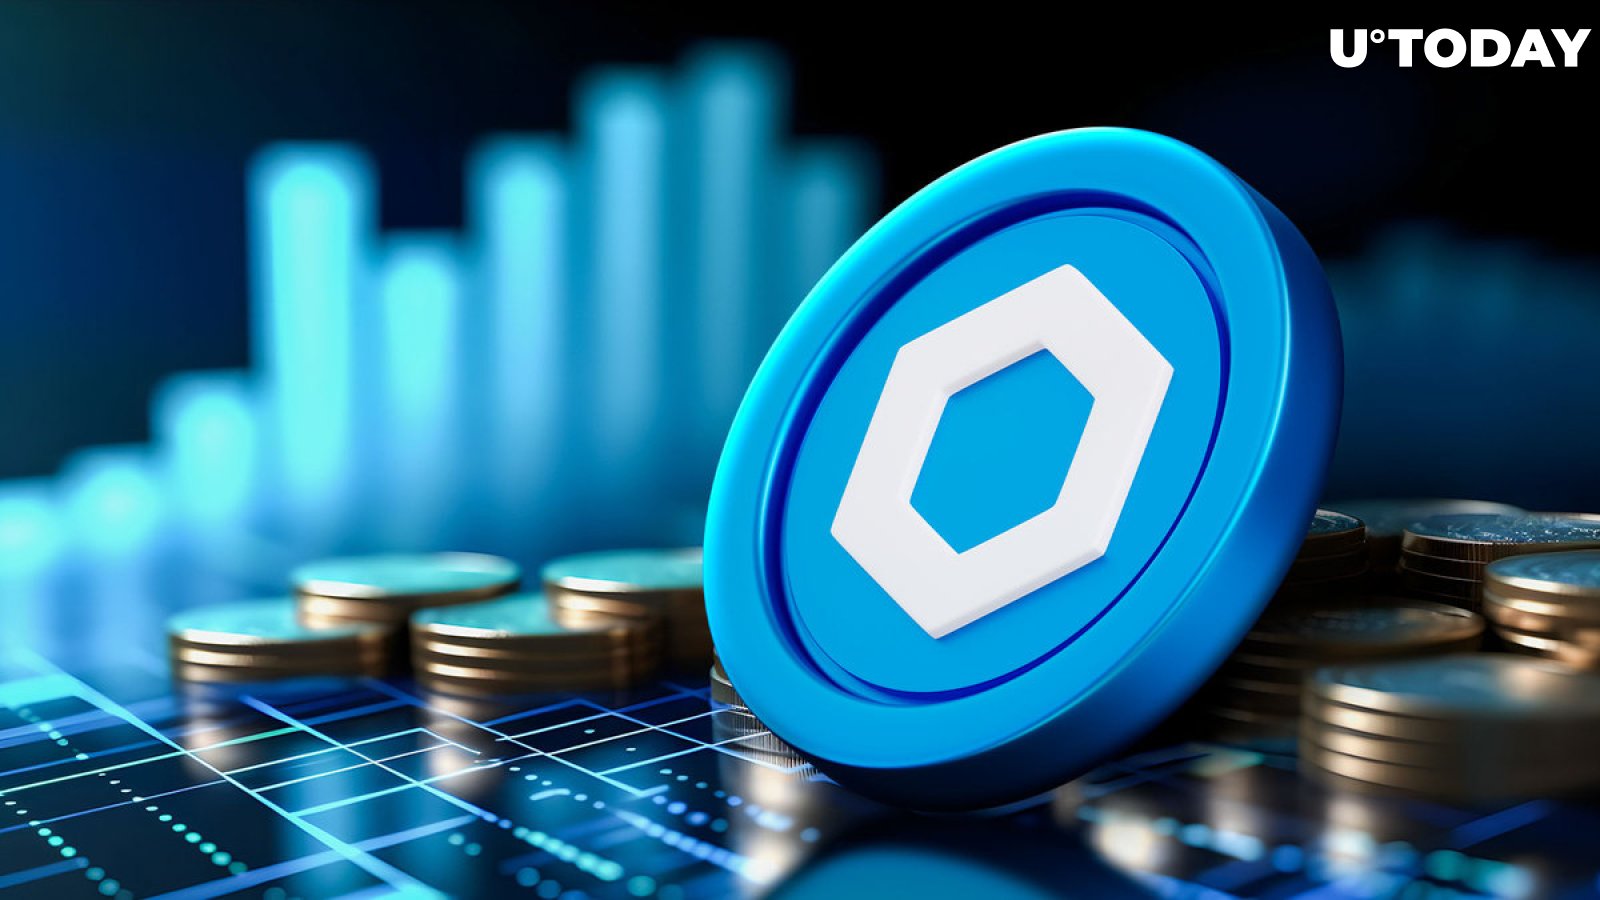 Chainlink (LINK) Price Skyrockets Amid Mysterious $83.6 Million Accumulation